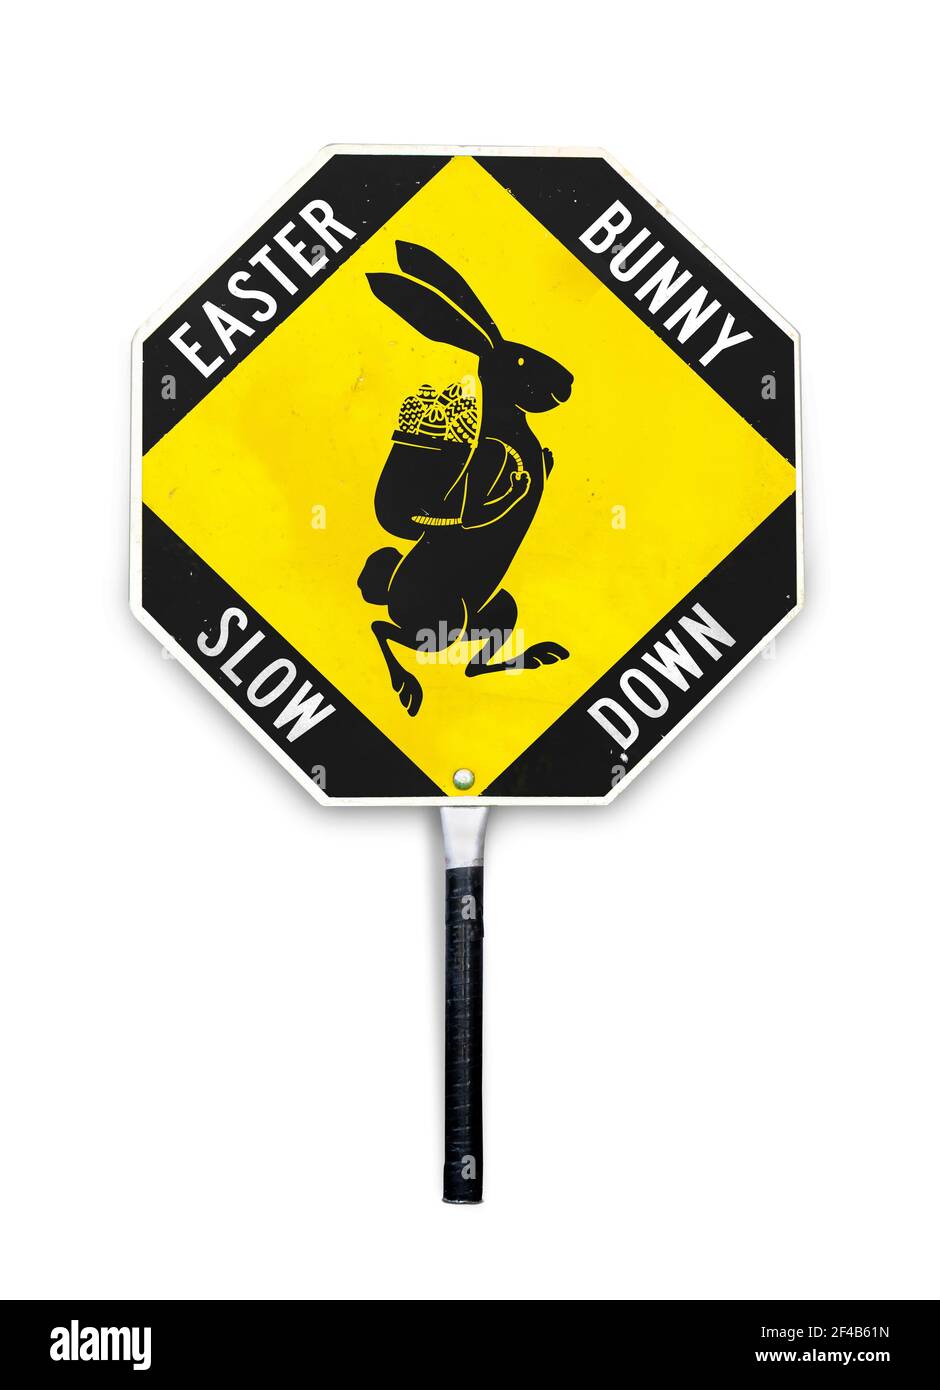 Slow down sign, Easter bunny crossing. Easter themed traffic alert signal used by crossing guards and in work zones. Yellow and black metal sign. Stock Photo